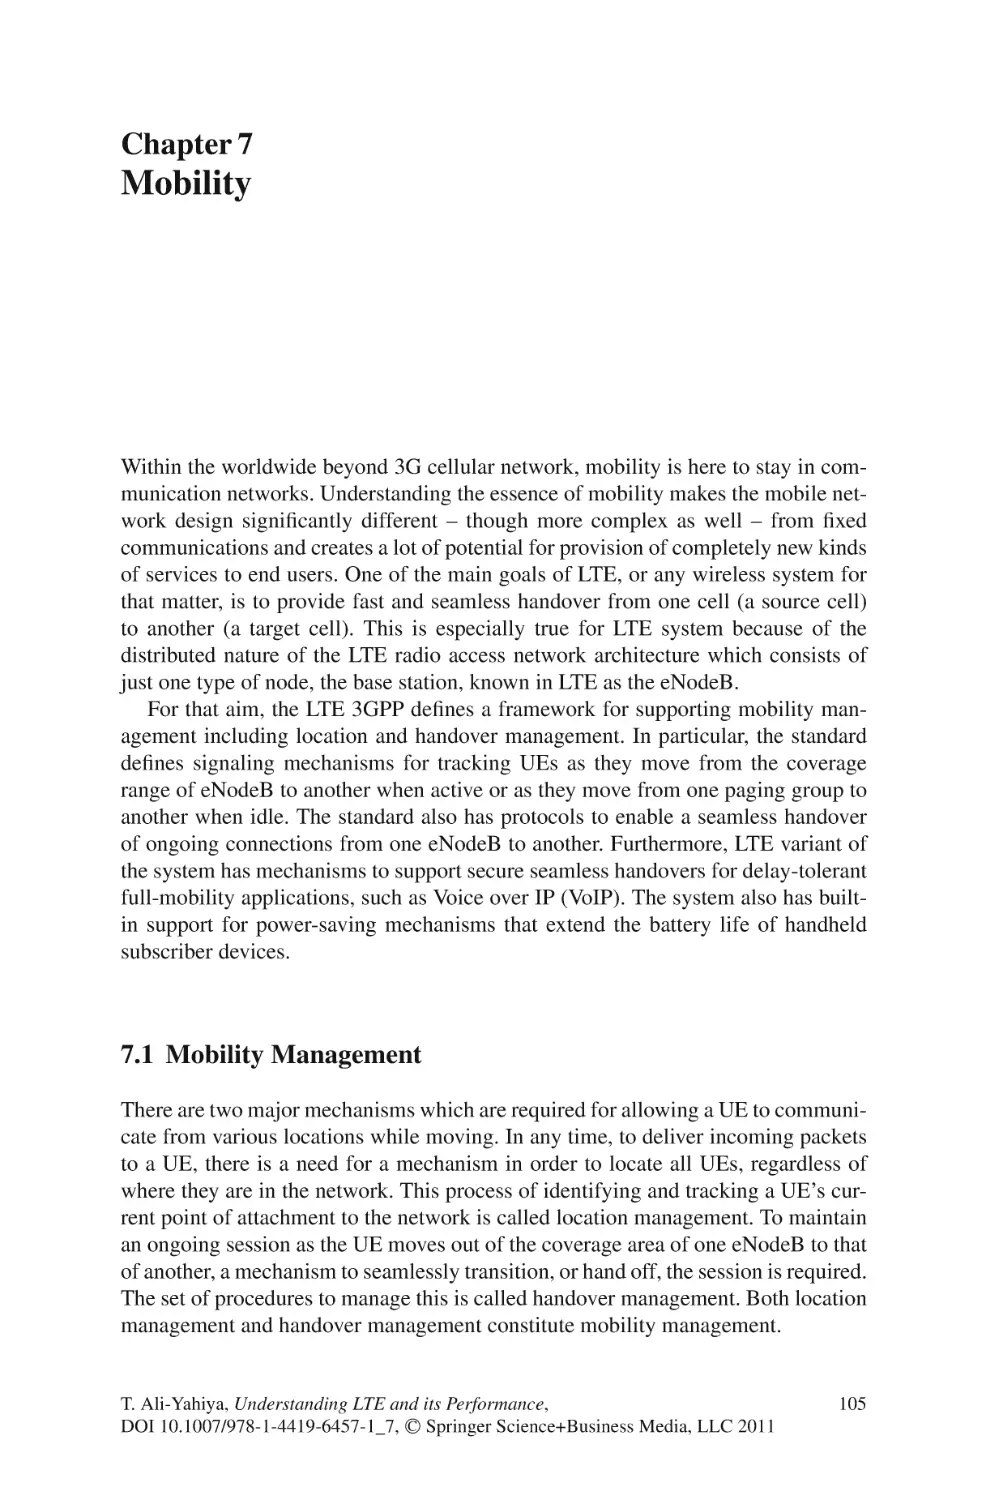 7  Mobility
7.1  Mobility Management